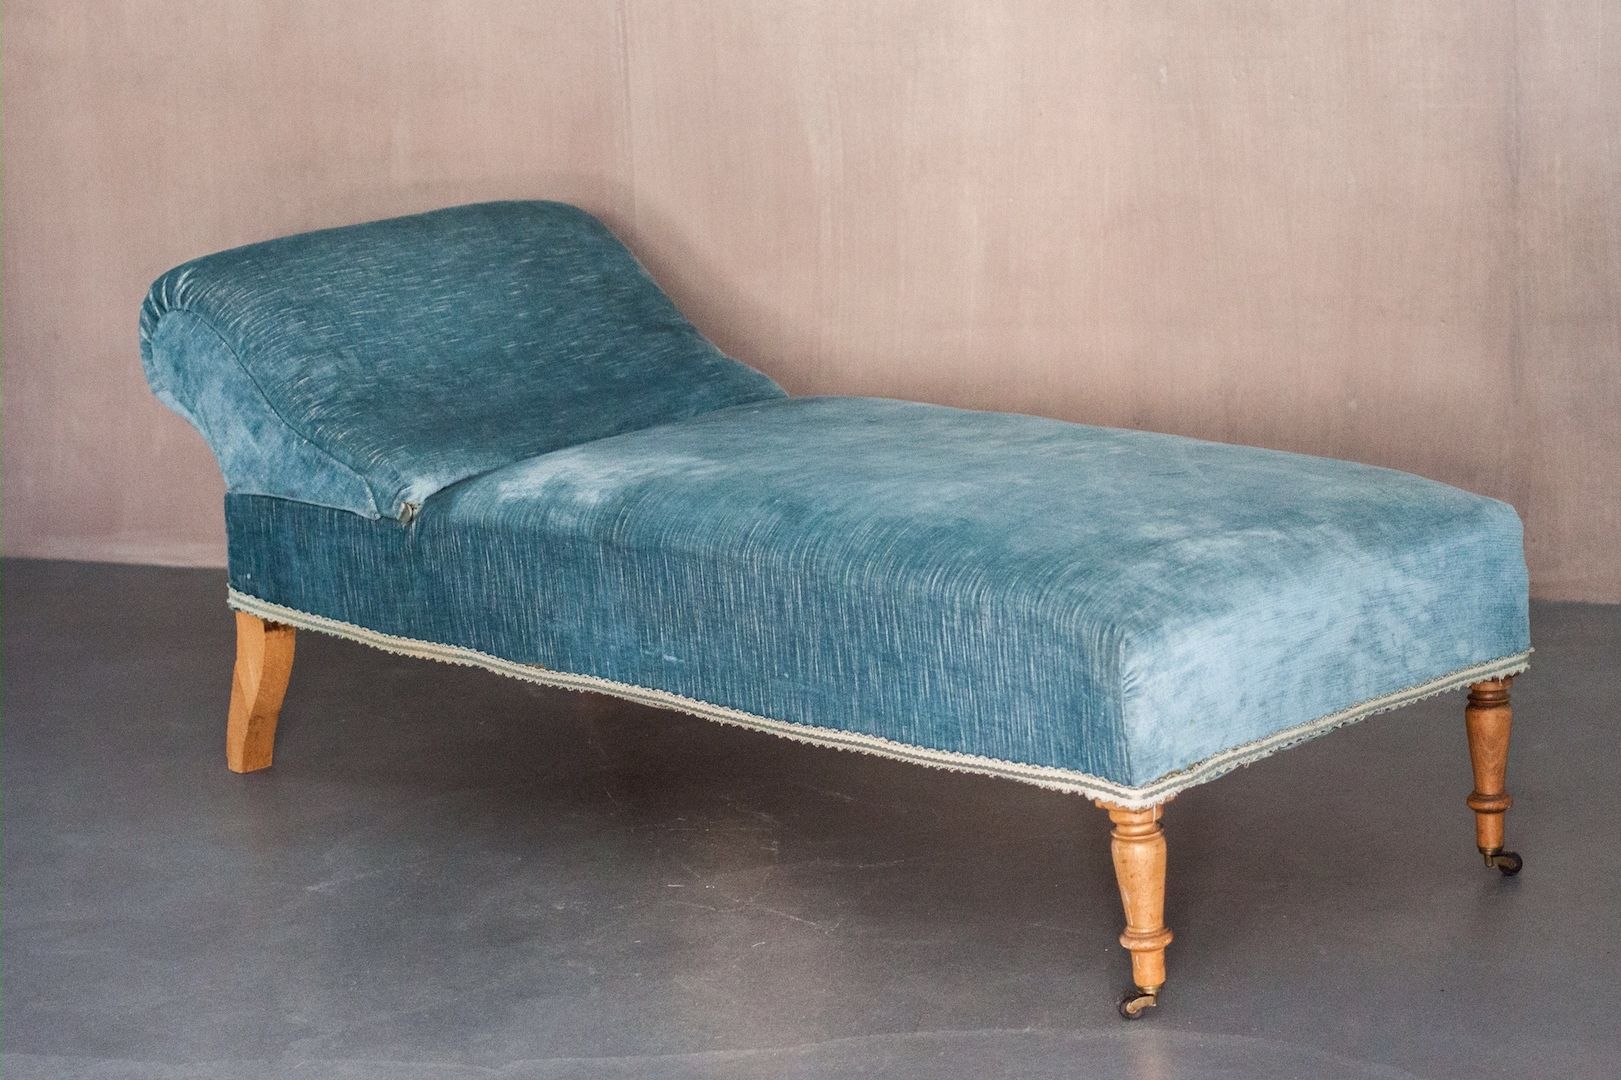 Velvet Chaise Lounges In Fashionable Vintage Chaise Lounge With Sky Blue Velvet Upholstery For Sale At (View 8 of 15)